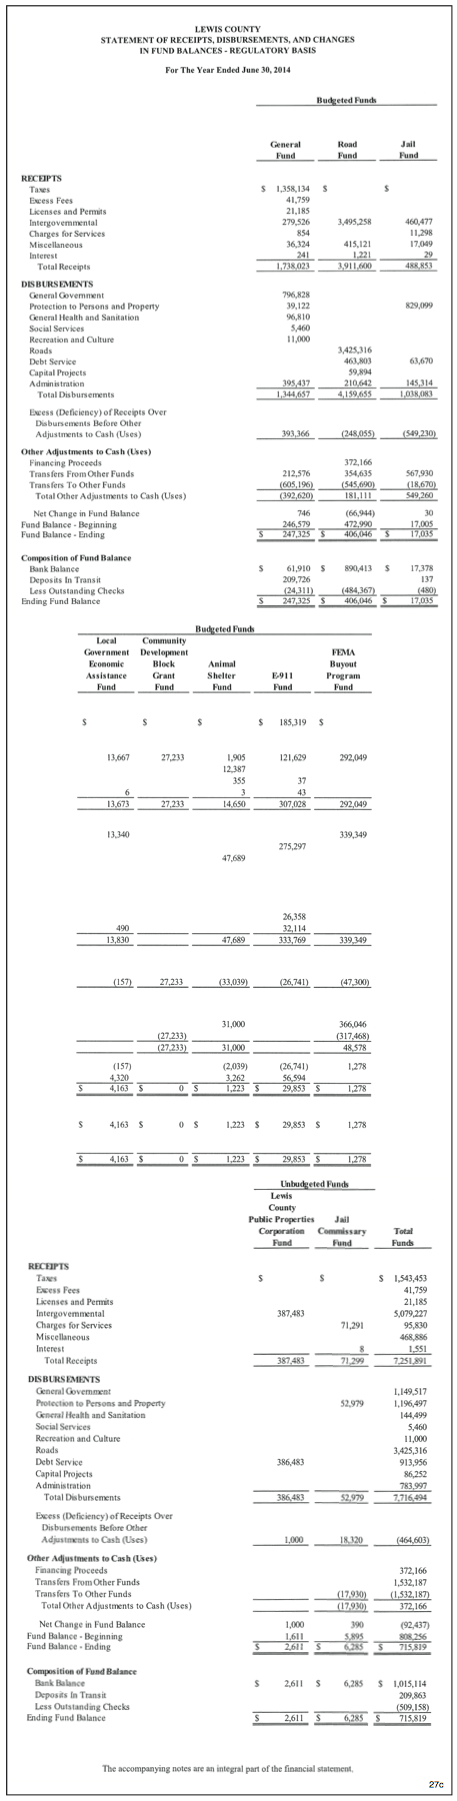 Lewis County financial statement 2013-14